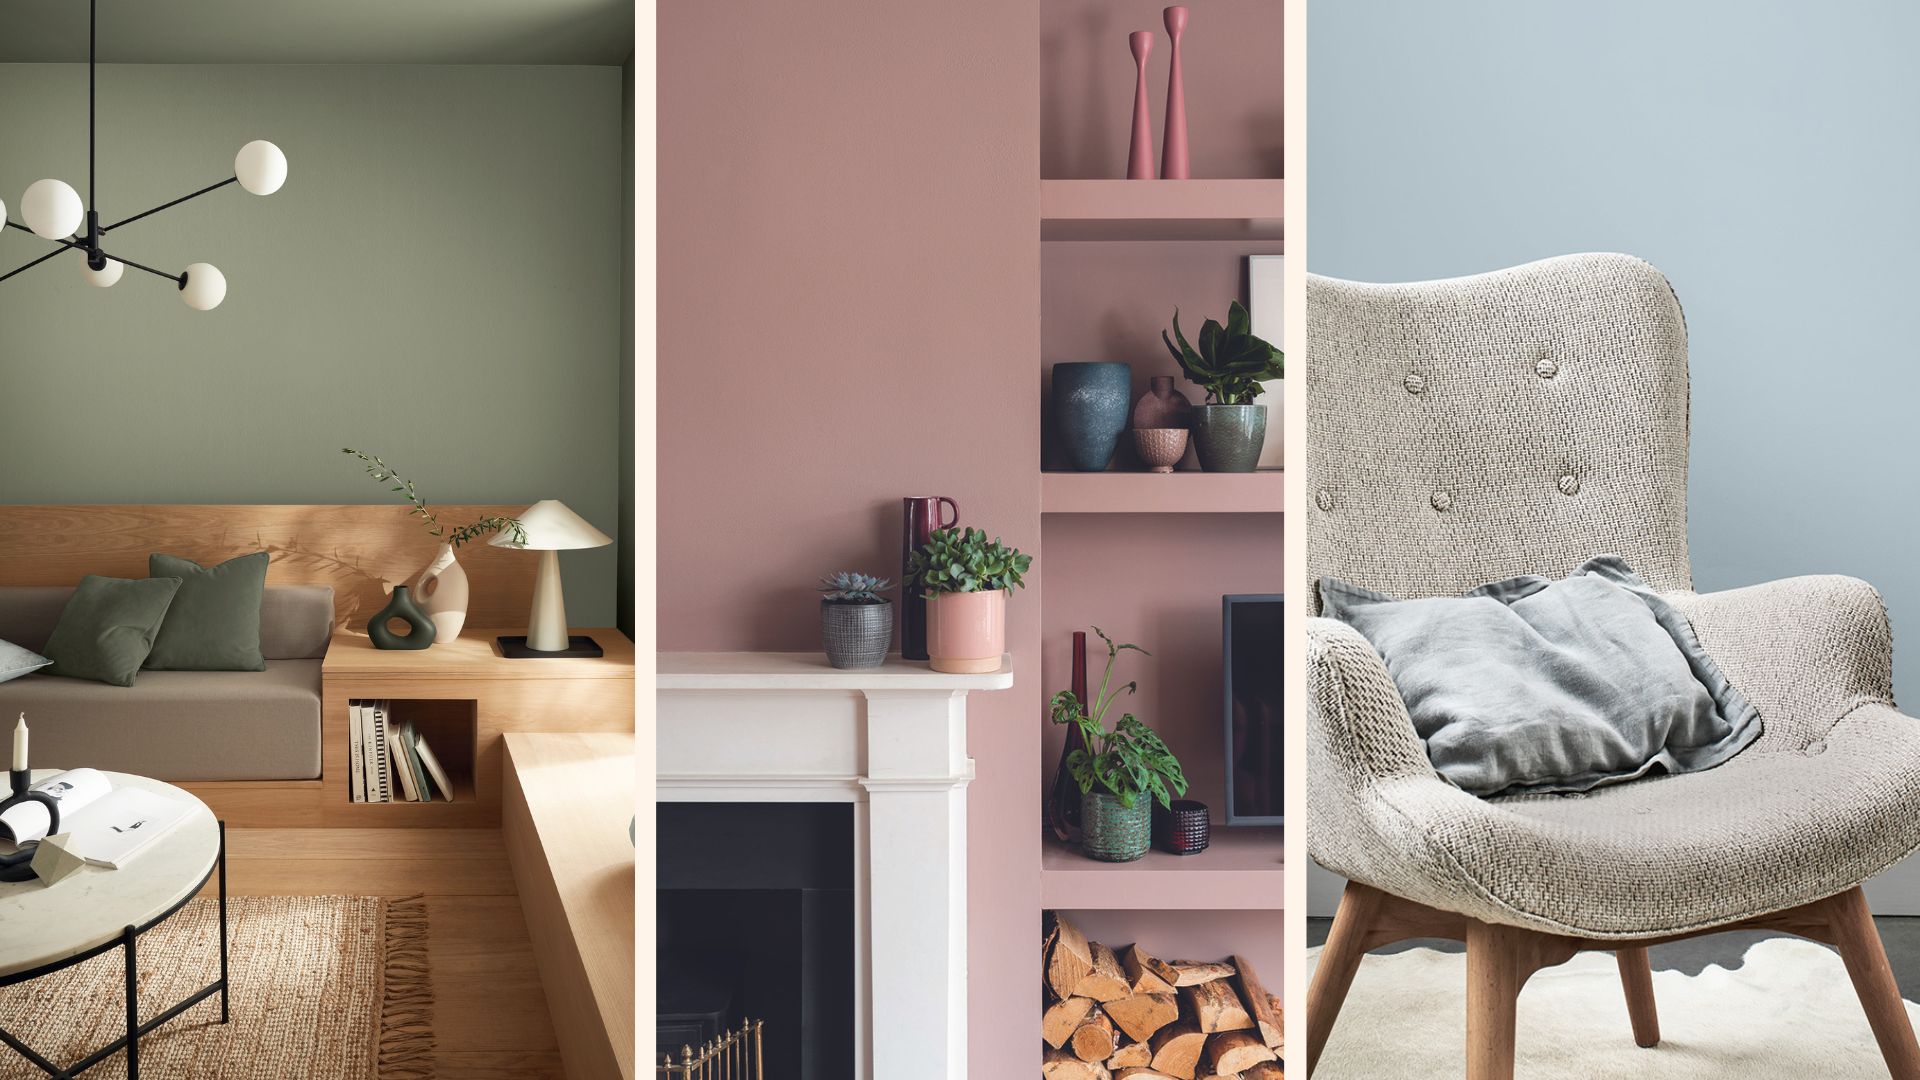 Revealed: The Little Greene green paint colors to use in your home